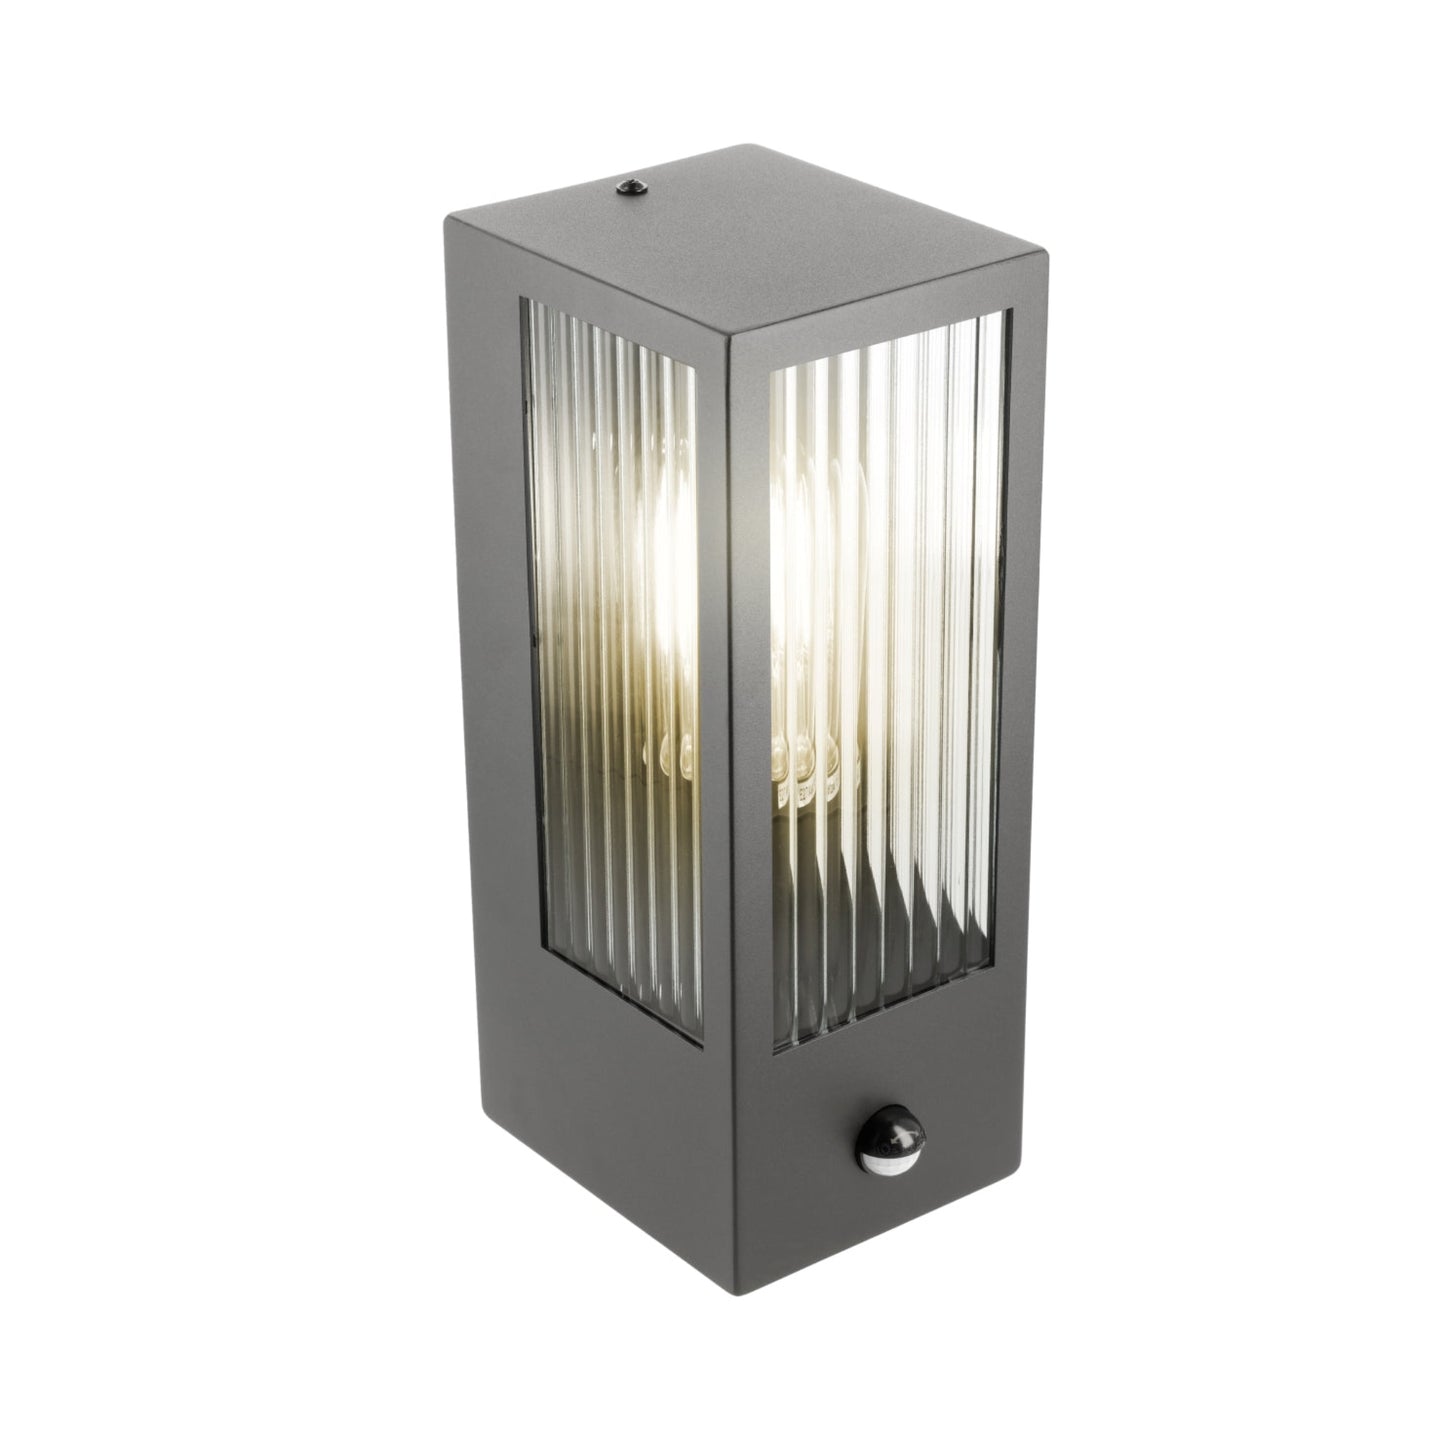 If you’re looking for a modern take on a traditional outdoor wall light, this modern bevelled glass rectangle wall light is perfect for adding style and protection for your home. This classic wall light is designed with a contemporary twist, styled with a rectangle shape and fitted with glass bevelled windows that allow the light to shine effectively. Integrated PIR Motion Sensor.